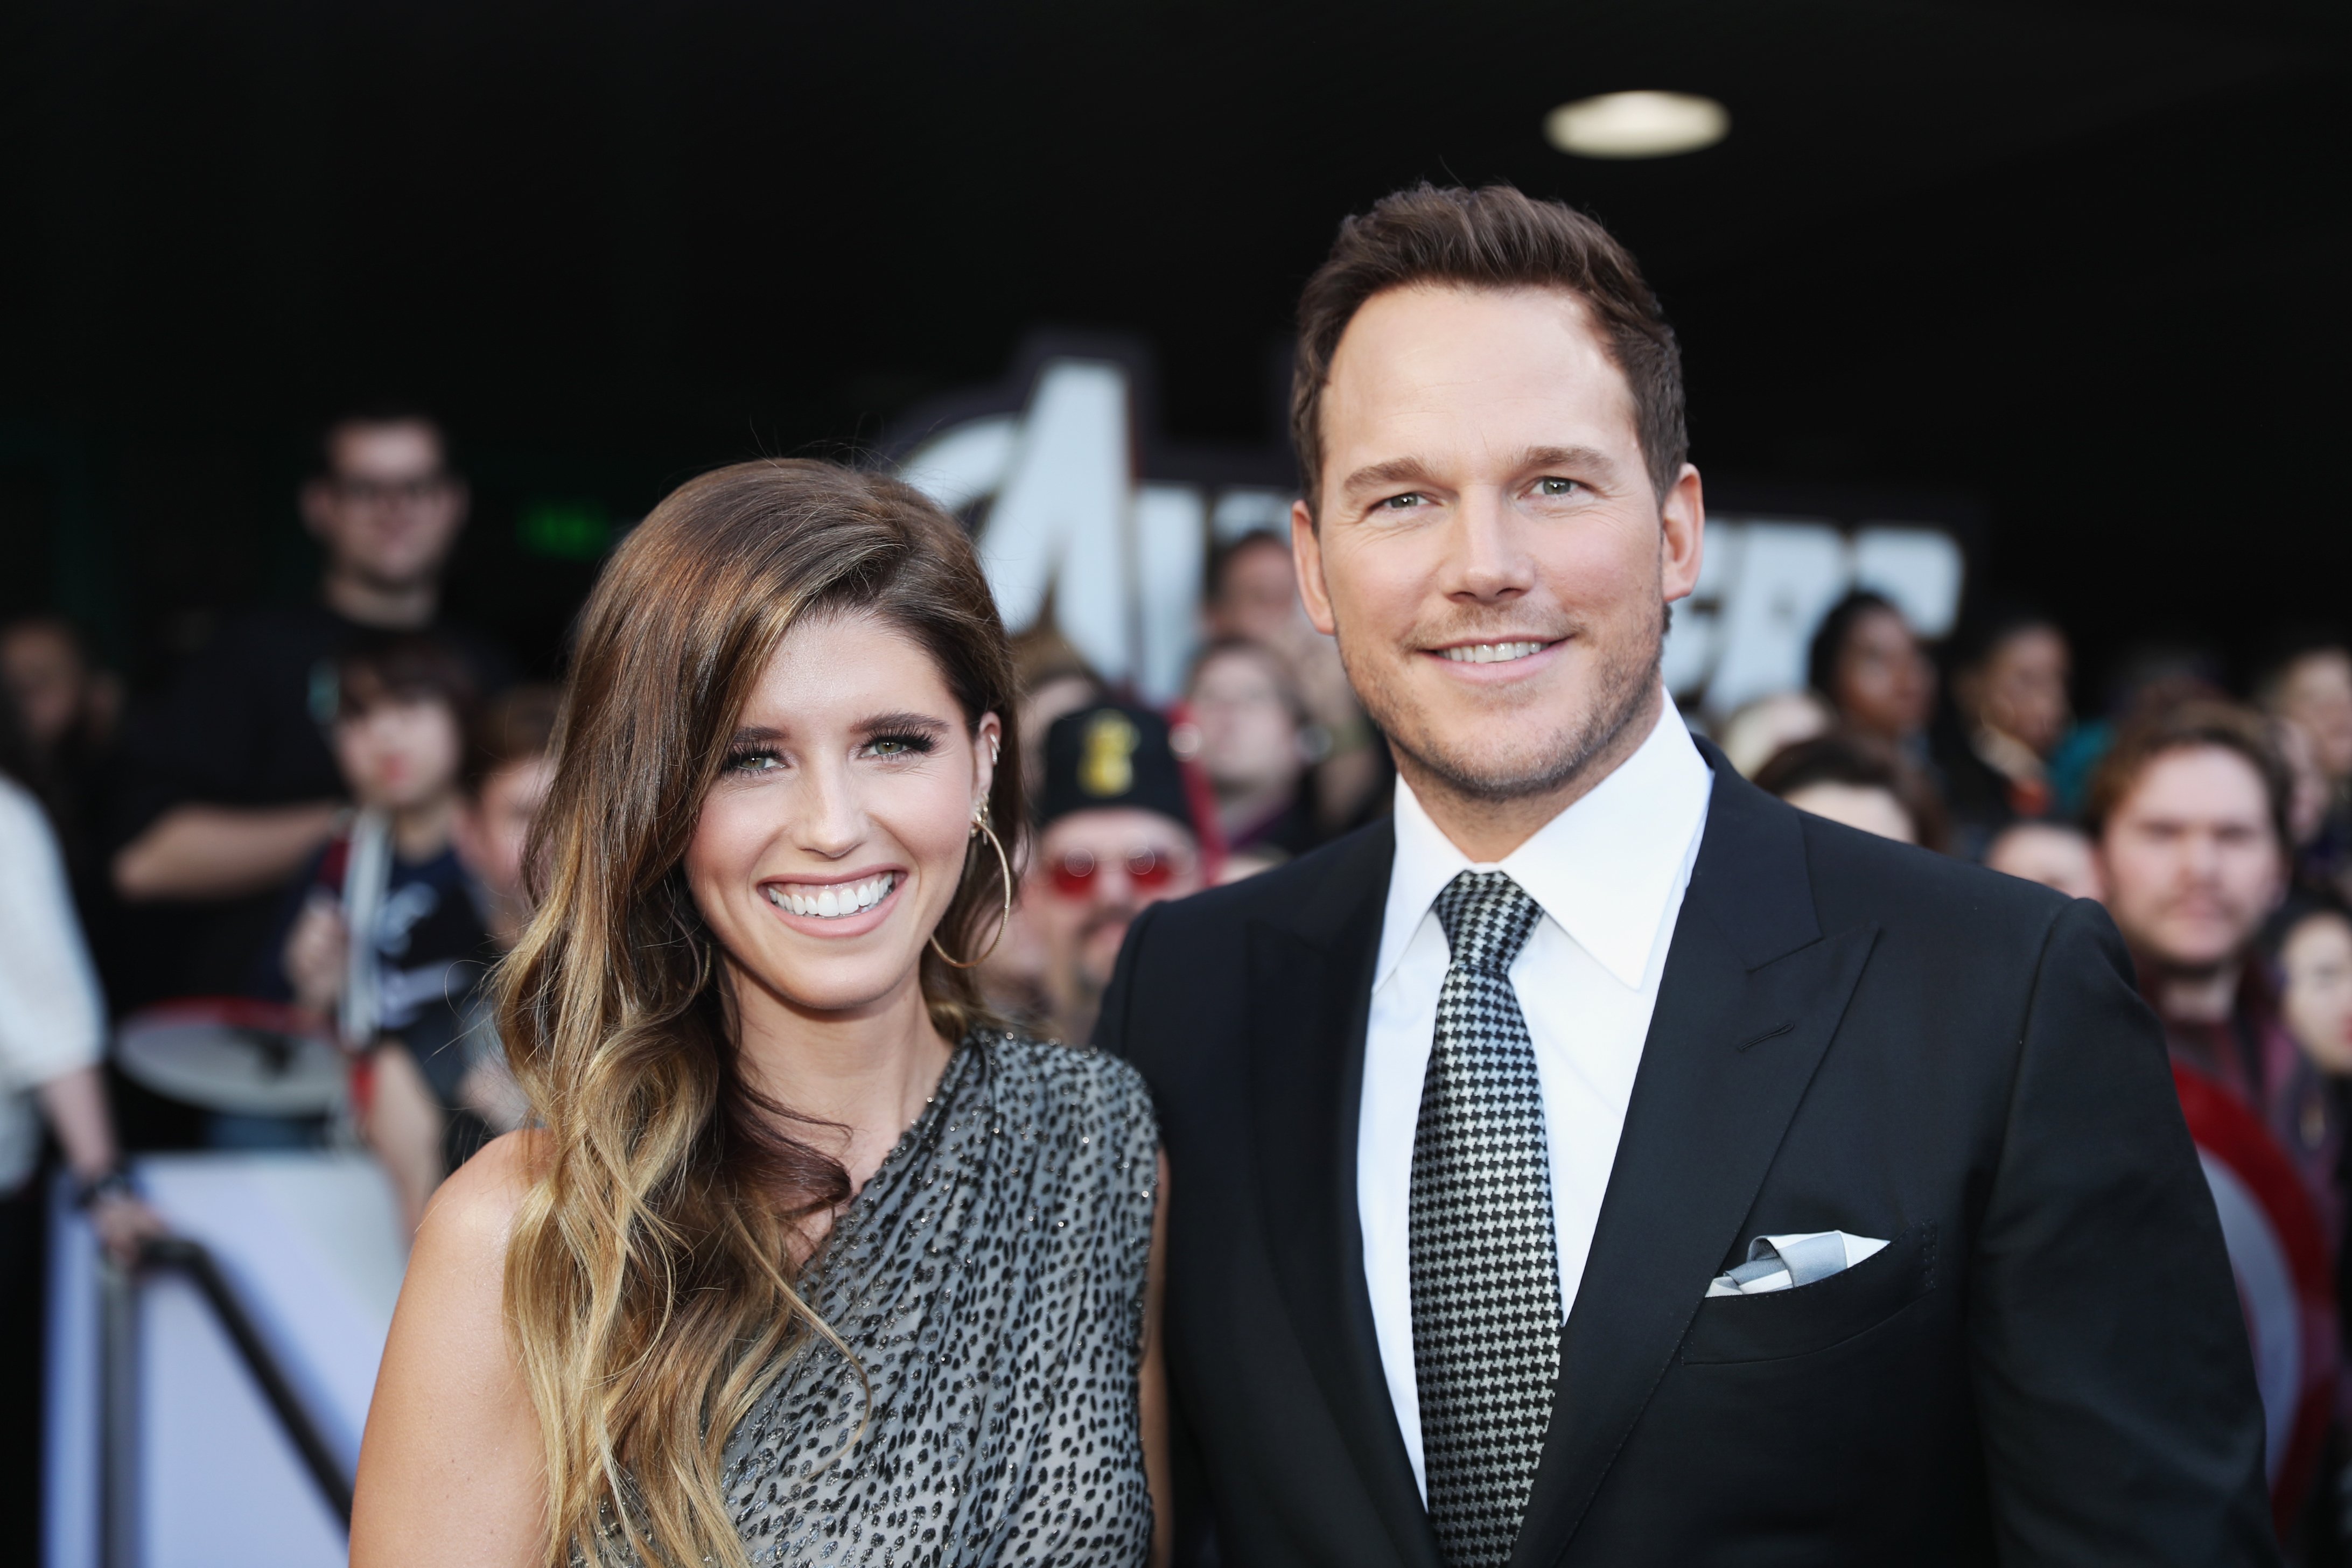 Katherine Schwarzenegger and Chris Pratt attend the premiere of "Avengers: Endgame" in Los Angeles on April 23, 2019 | Photo: Getty Images